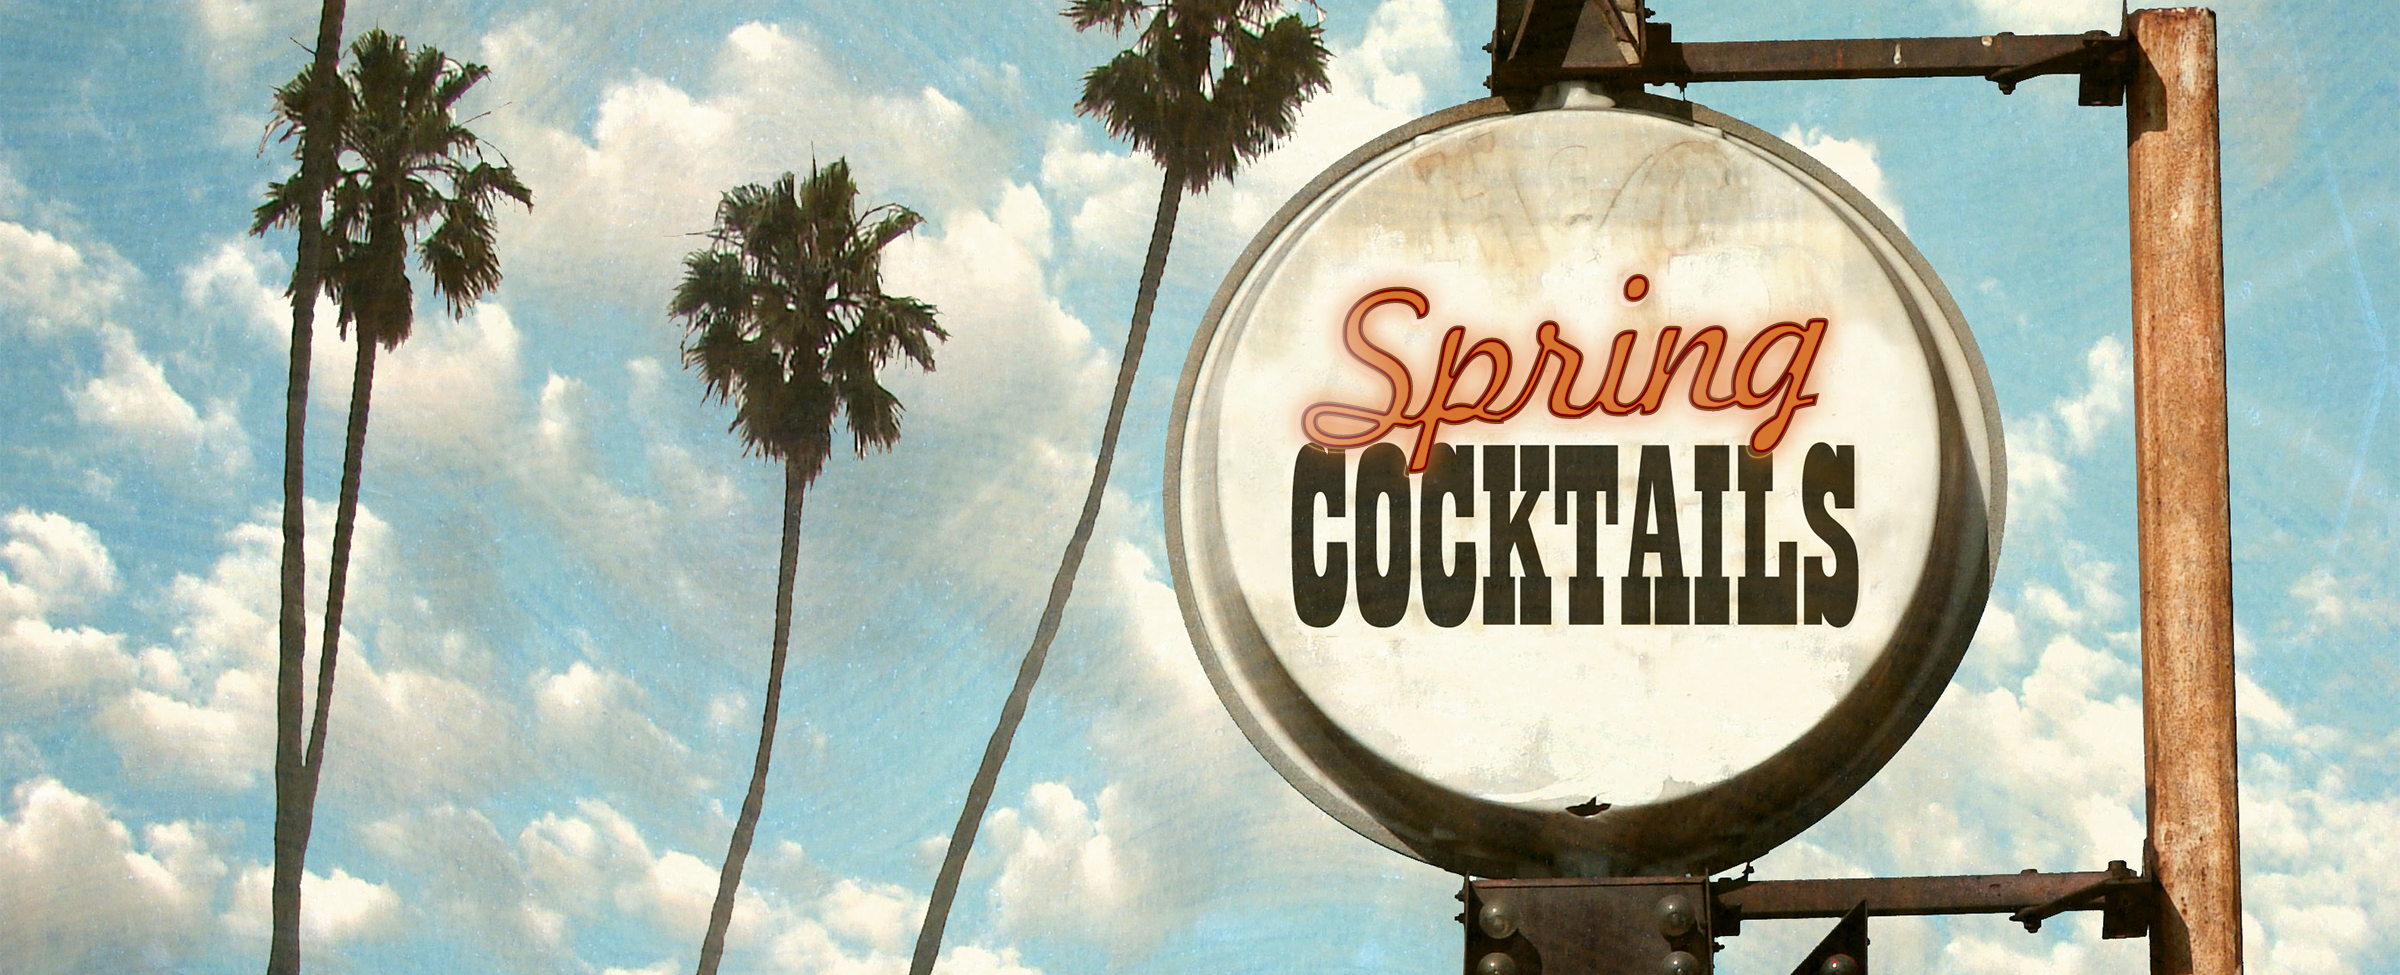 An industrial, vintage-style backlit sign hangs on a steel post featuring the words “spring cocktails” in red and black against a white background. Behind, is a blue sky peppered with light clouds, and four tall and skinny palm trees swaying in the breeze.